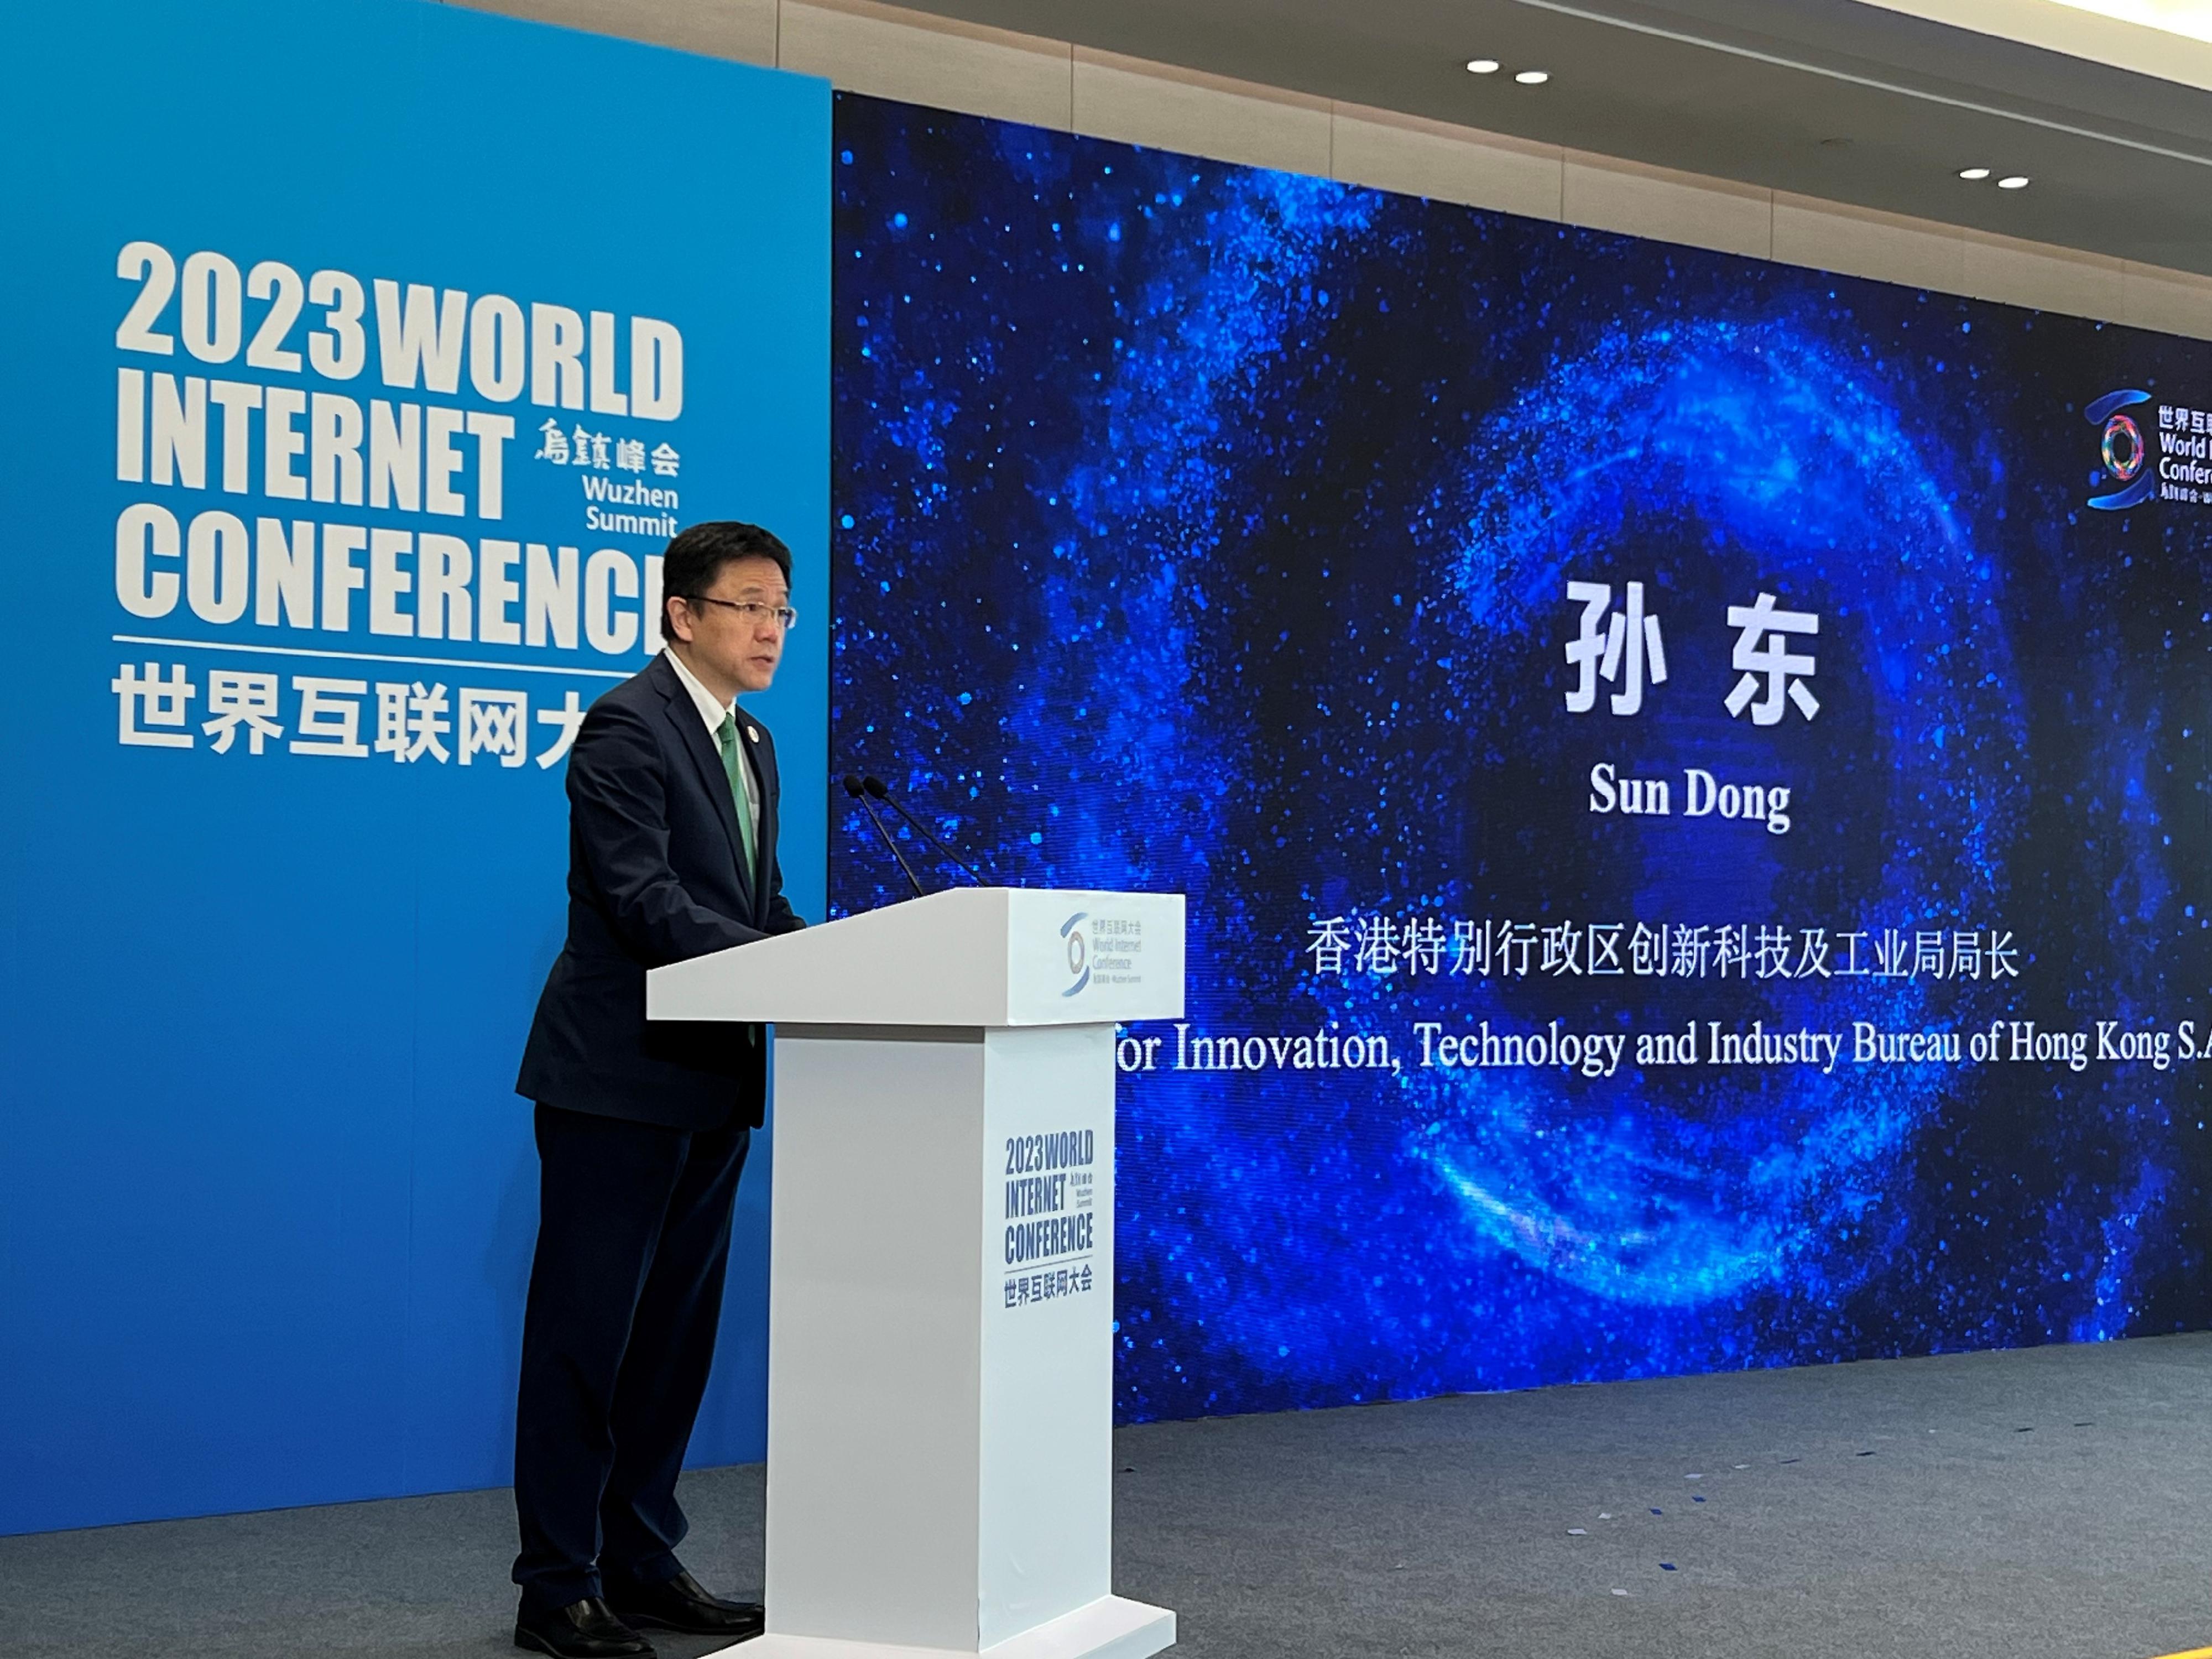 The Secretary for Innovation, Technology and Industry, Professor Sun Dong, delivers an opening speech at the Cross-Strait, Hong Kong and Macao Internet Development Forum of the 2023 World Internet Conference Wuzhen Summit in Zhejiang today (November 9).